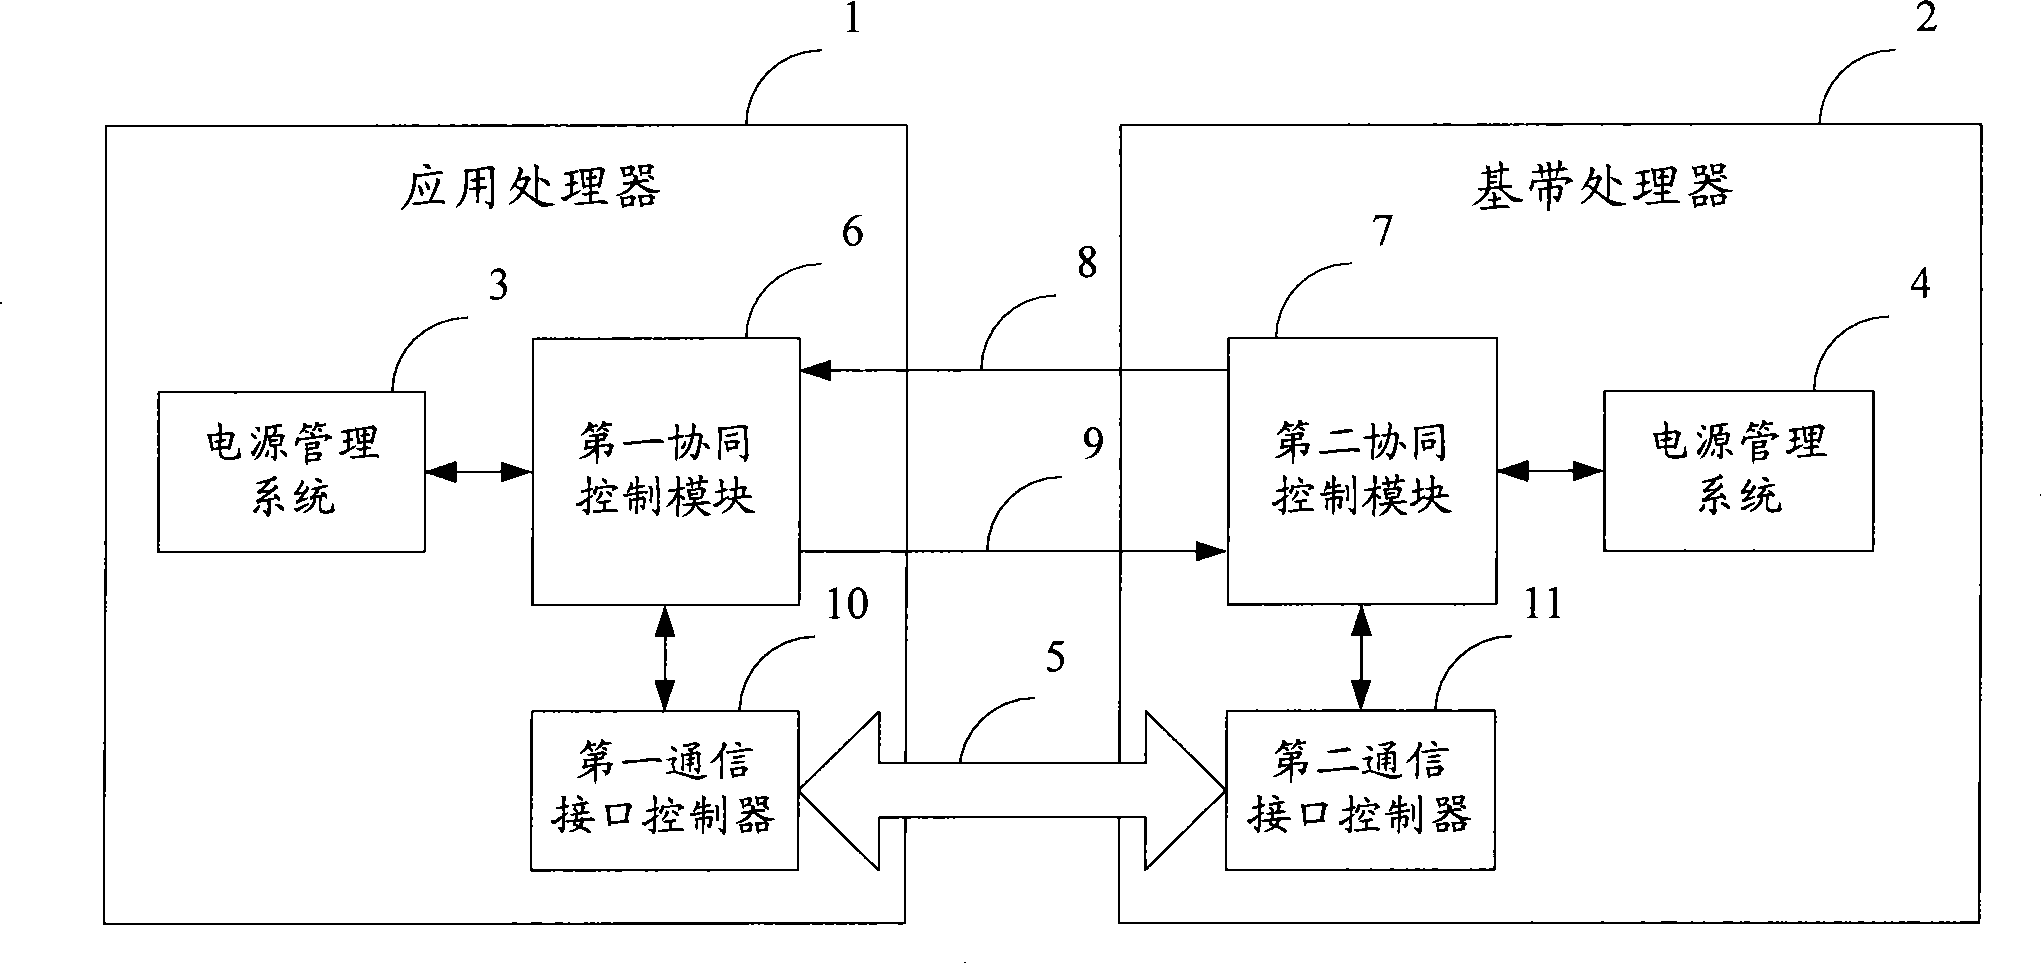 Electric power management apparatus and method for mobile terminal based on dual processor